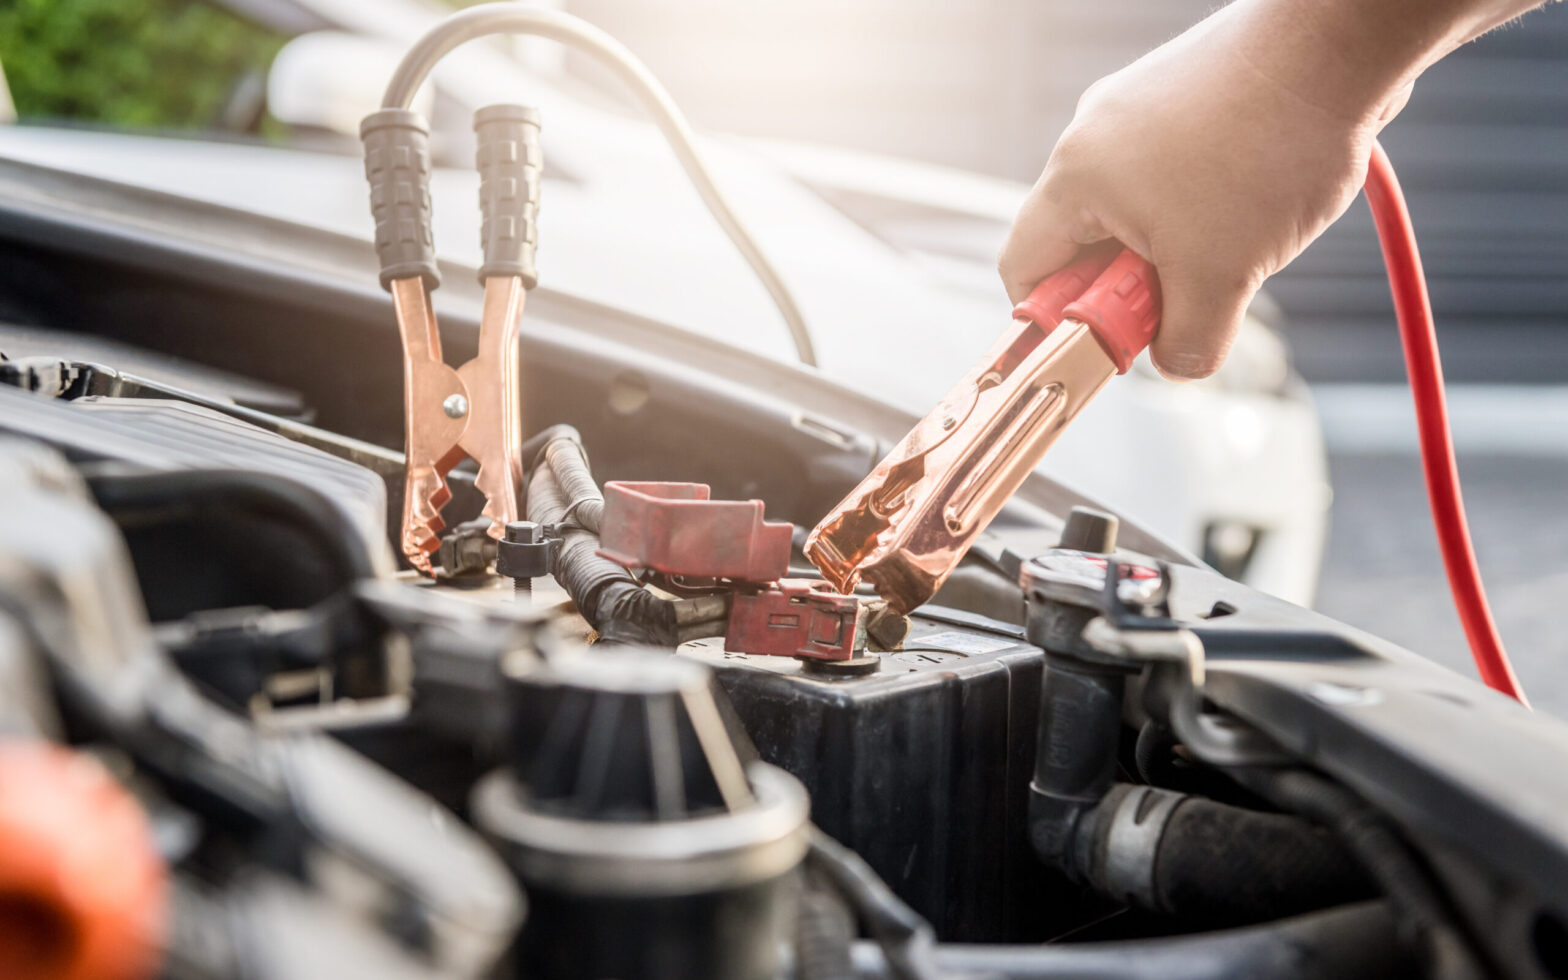 how to jump start a car properly